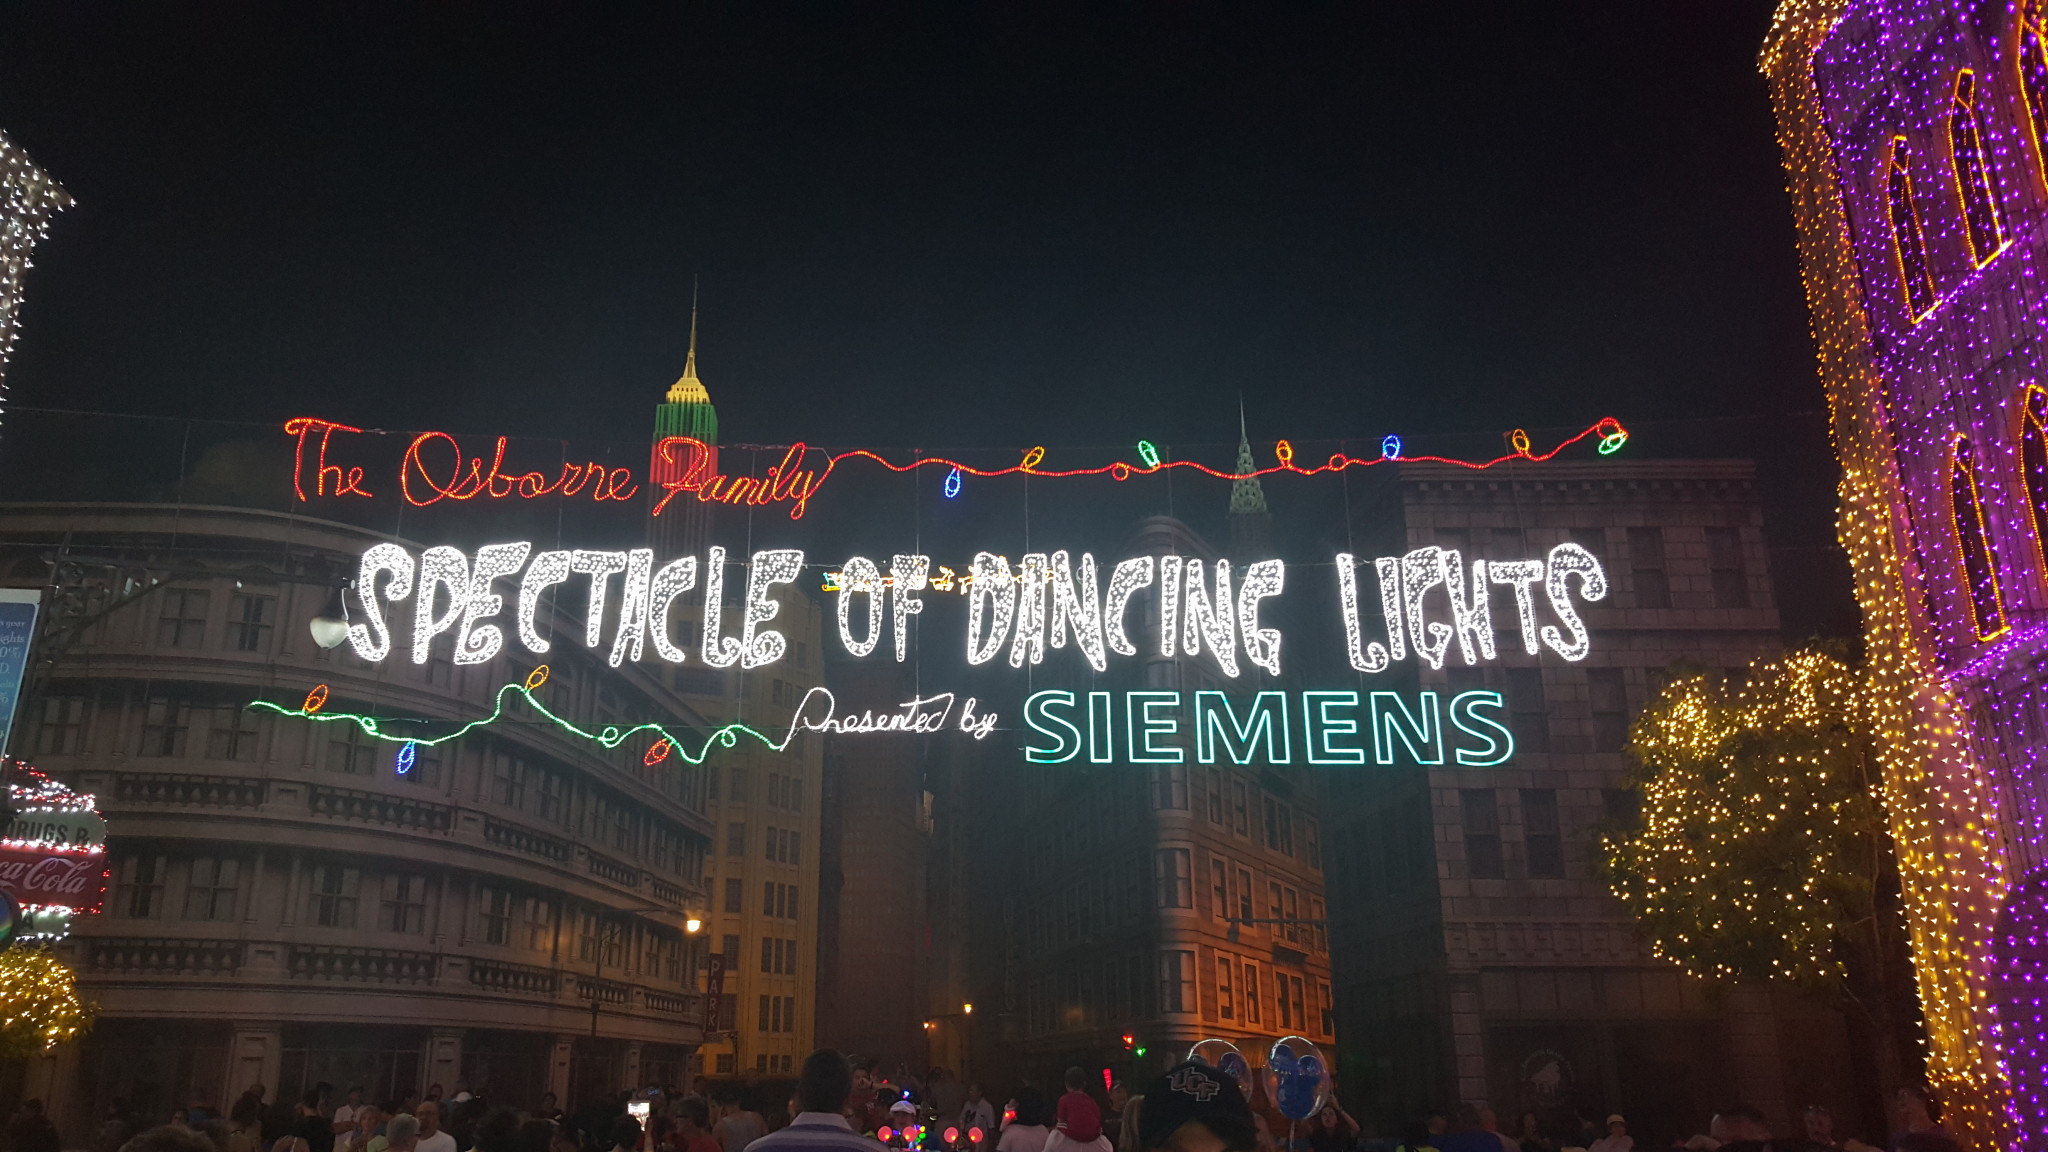 Save the Osborne Family Spectacle of Dancing Lights